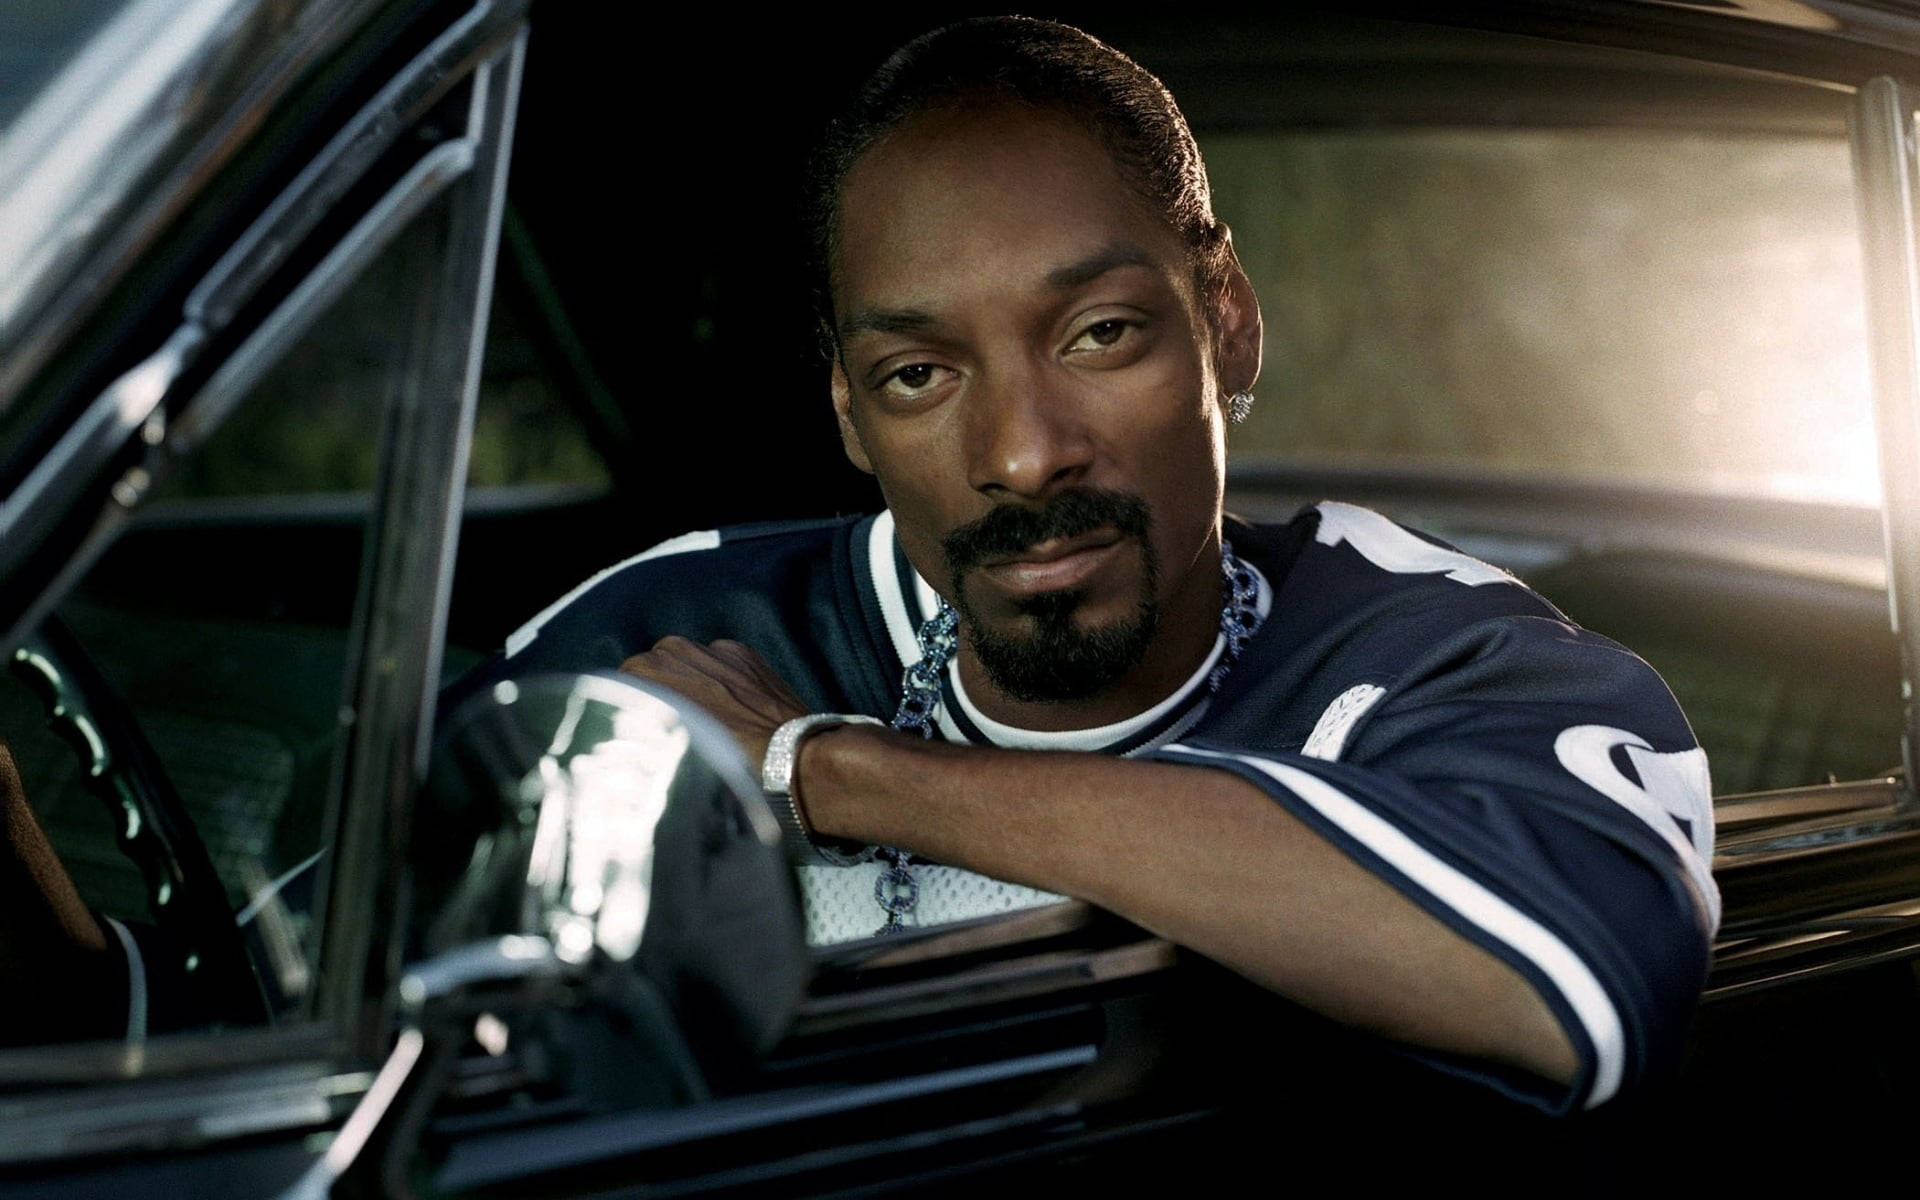 Snoop Dogg Chilling In A Car Wallpaper